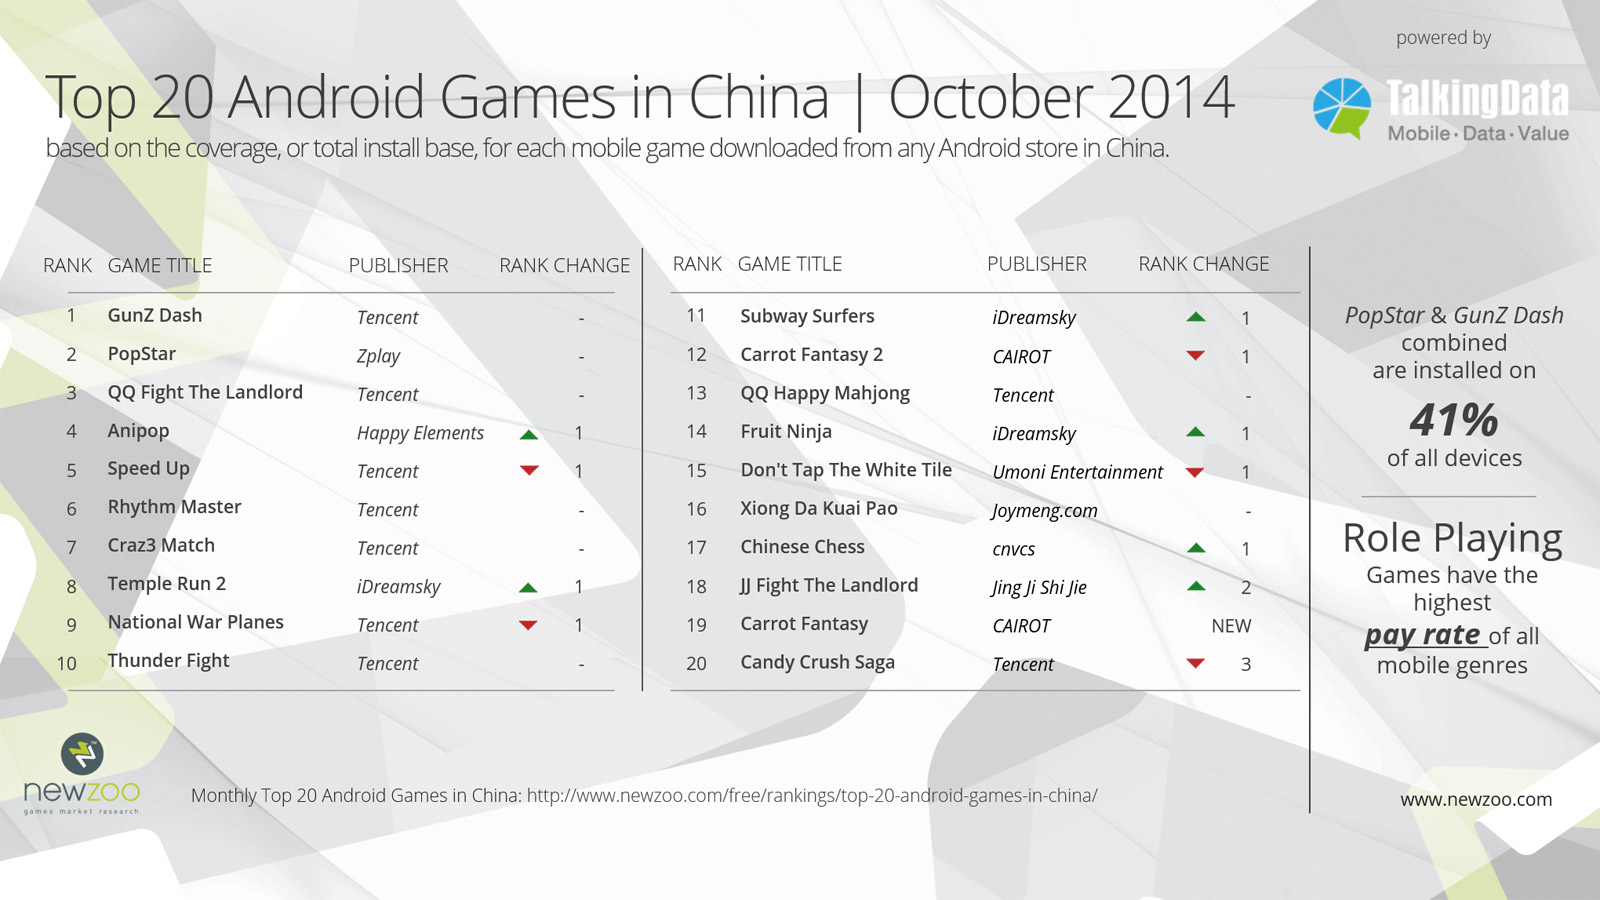 Newzoo_Top20_Android_Games_China_Oct2014